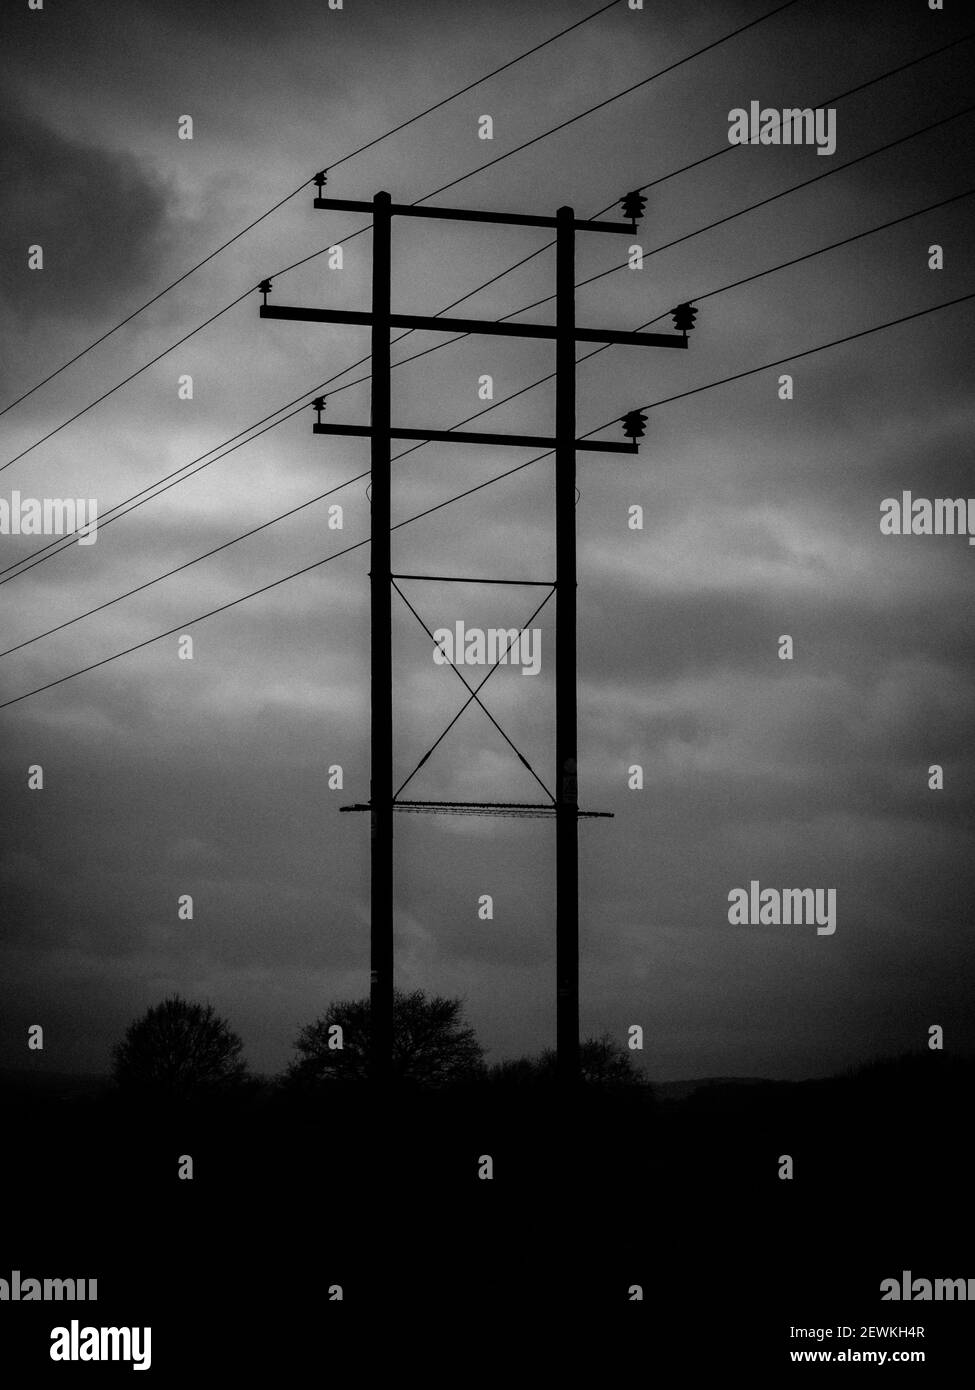 A very moody photograph of a telegraph pole with insulators and cables. Stock Photo